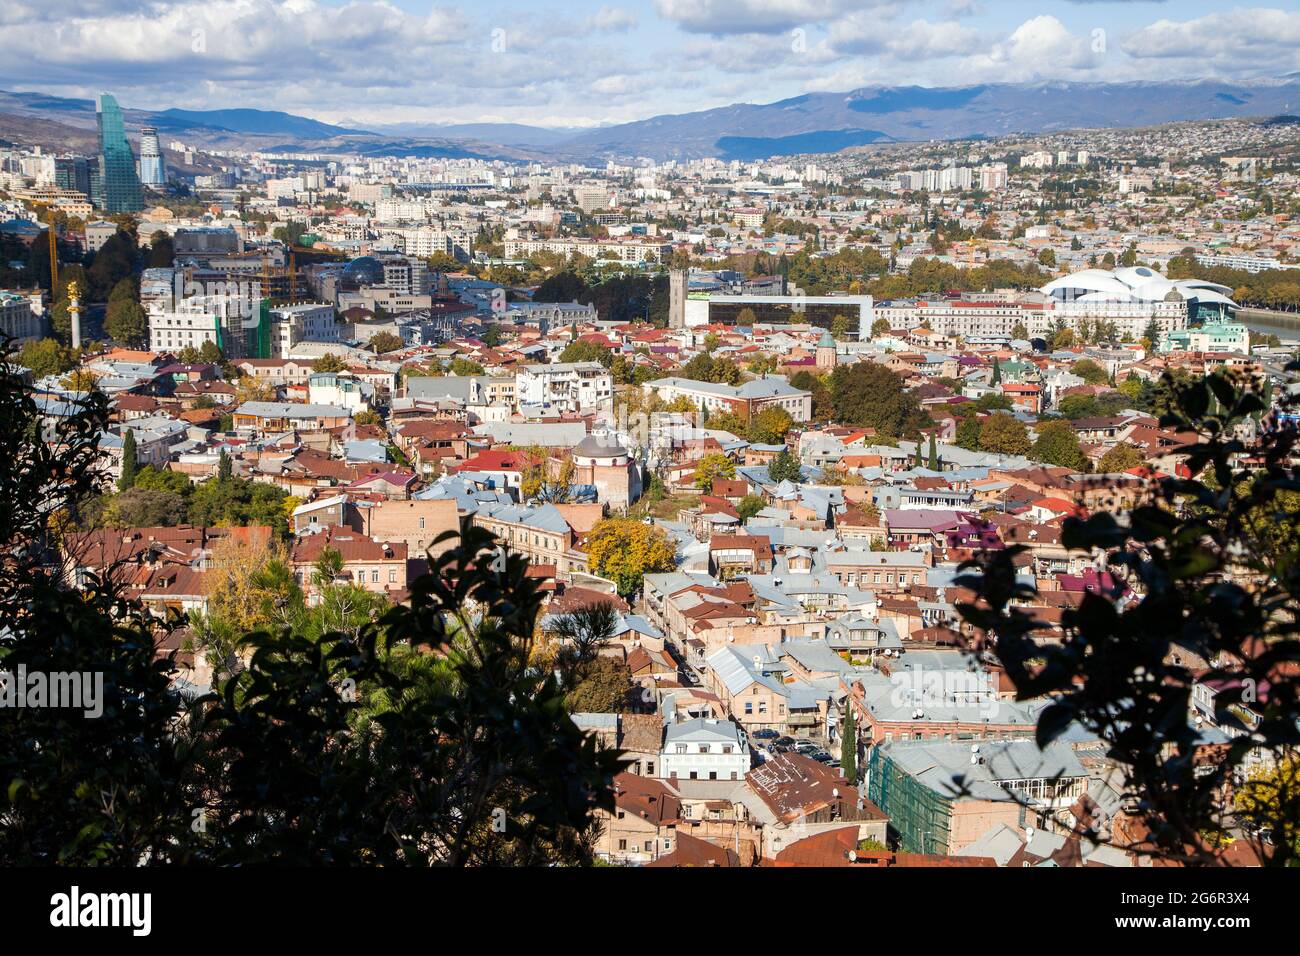 Panoramic view of Tbilisi city from the Narikala Fortress, old town and modern architecture.Tbilisi is the capital of the country of Georgia. Stock Photo